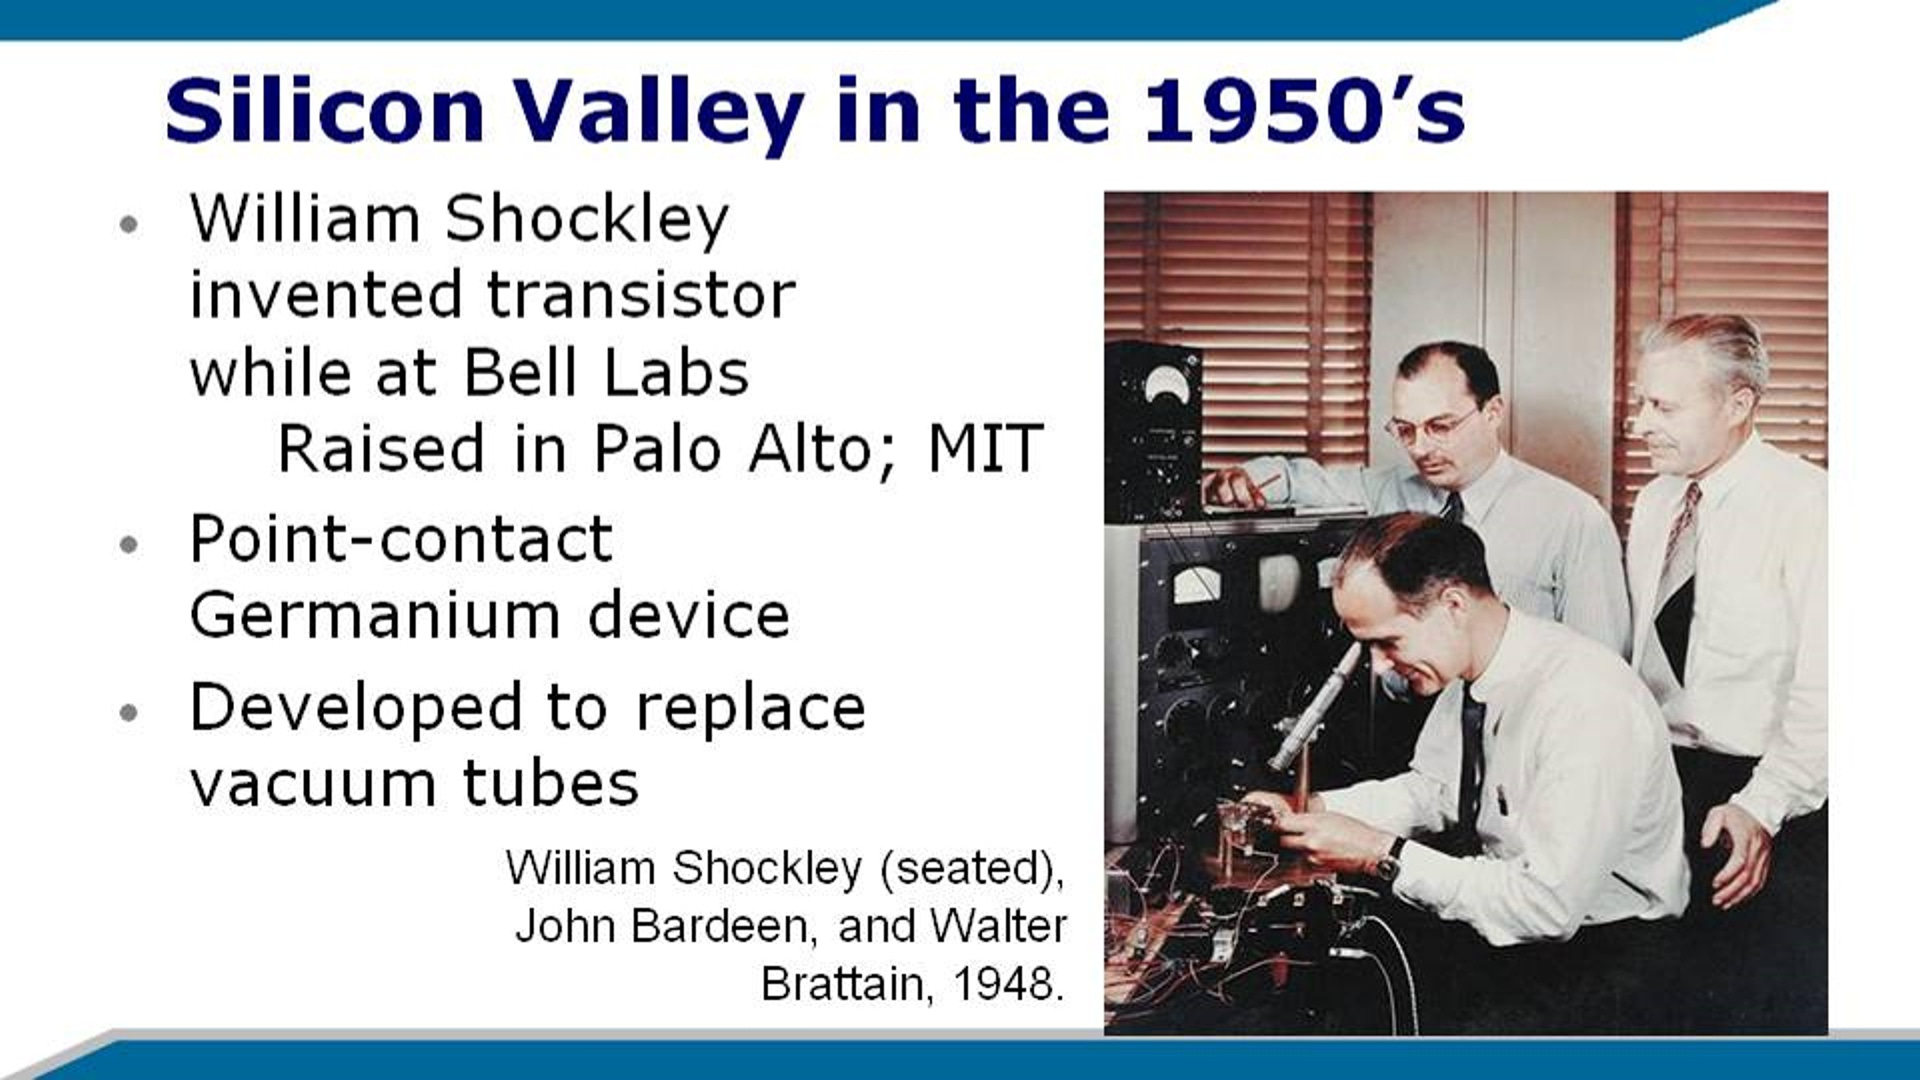 Start of Semiconductor Era in Silicon Valley